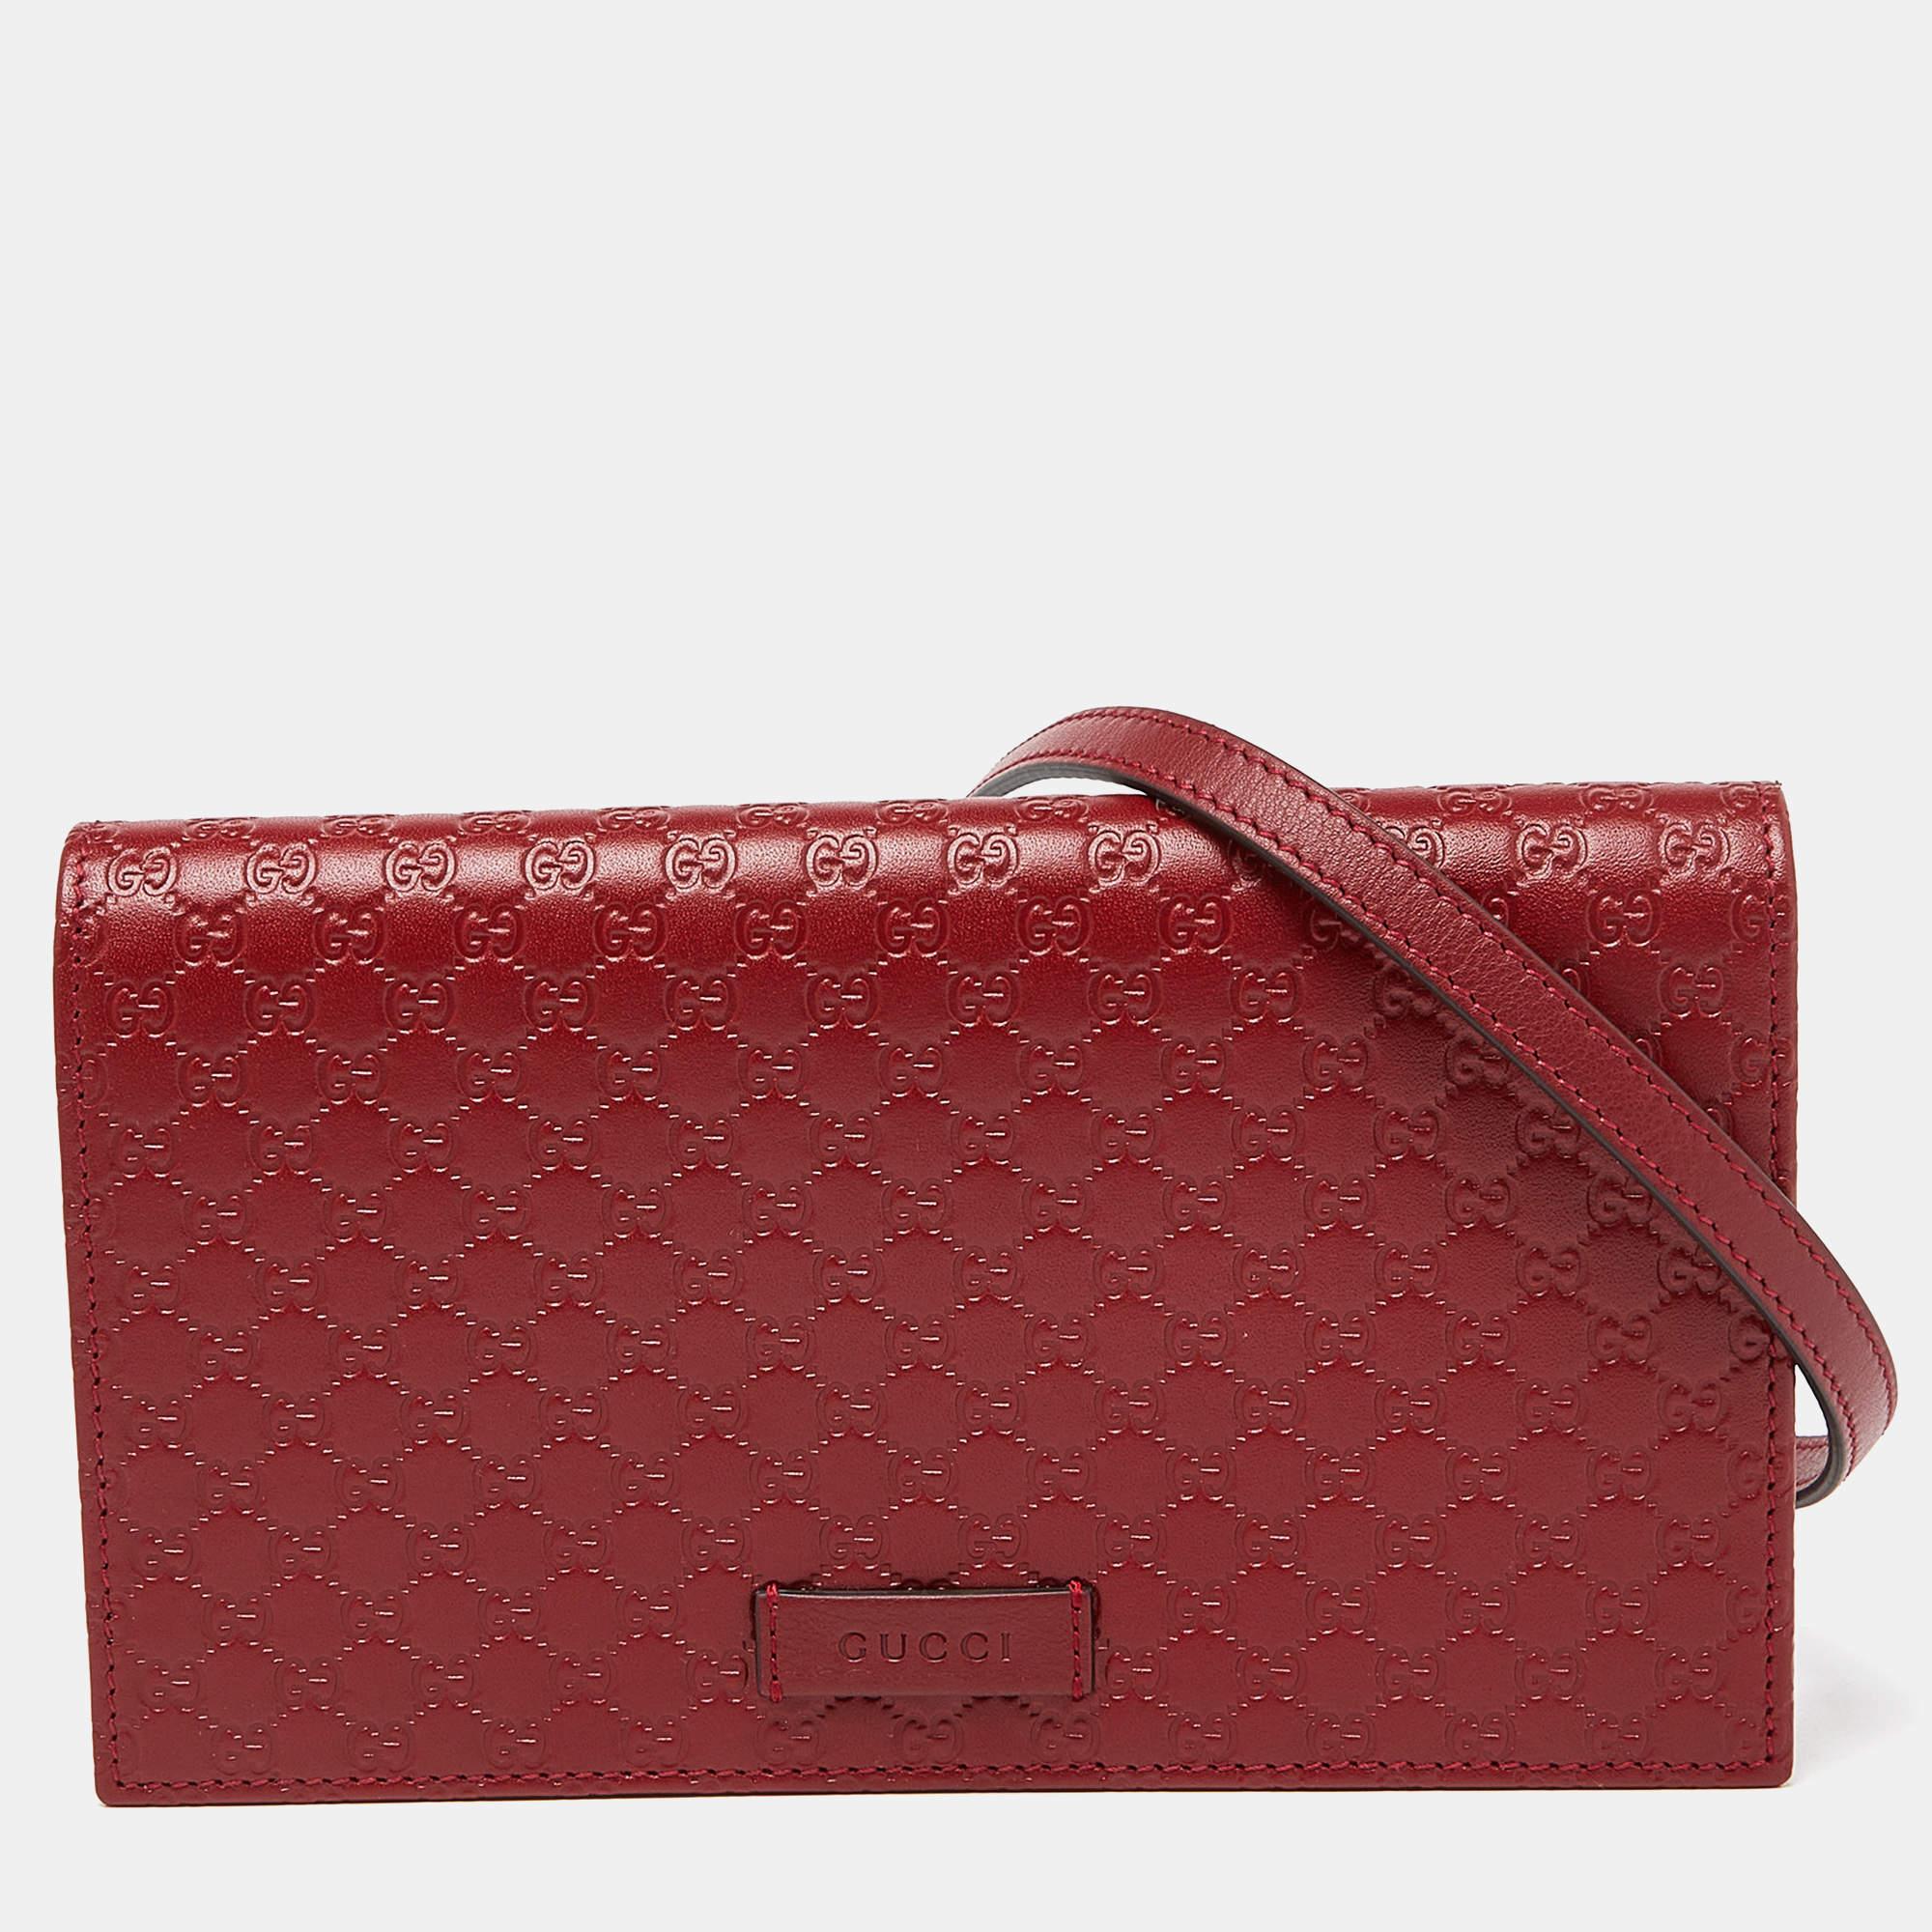 Gucci Red Microguccissima Leather Flap Crossbody Bag 6